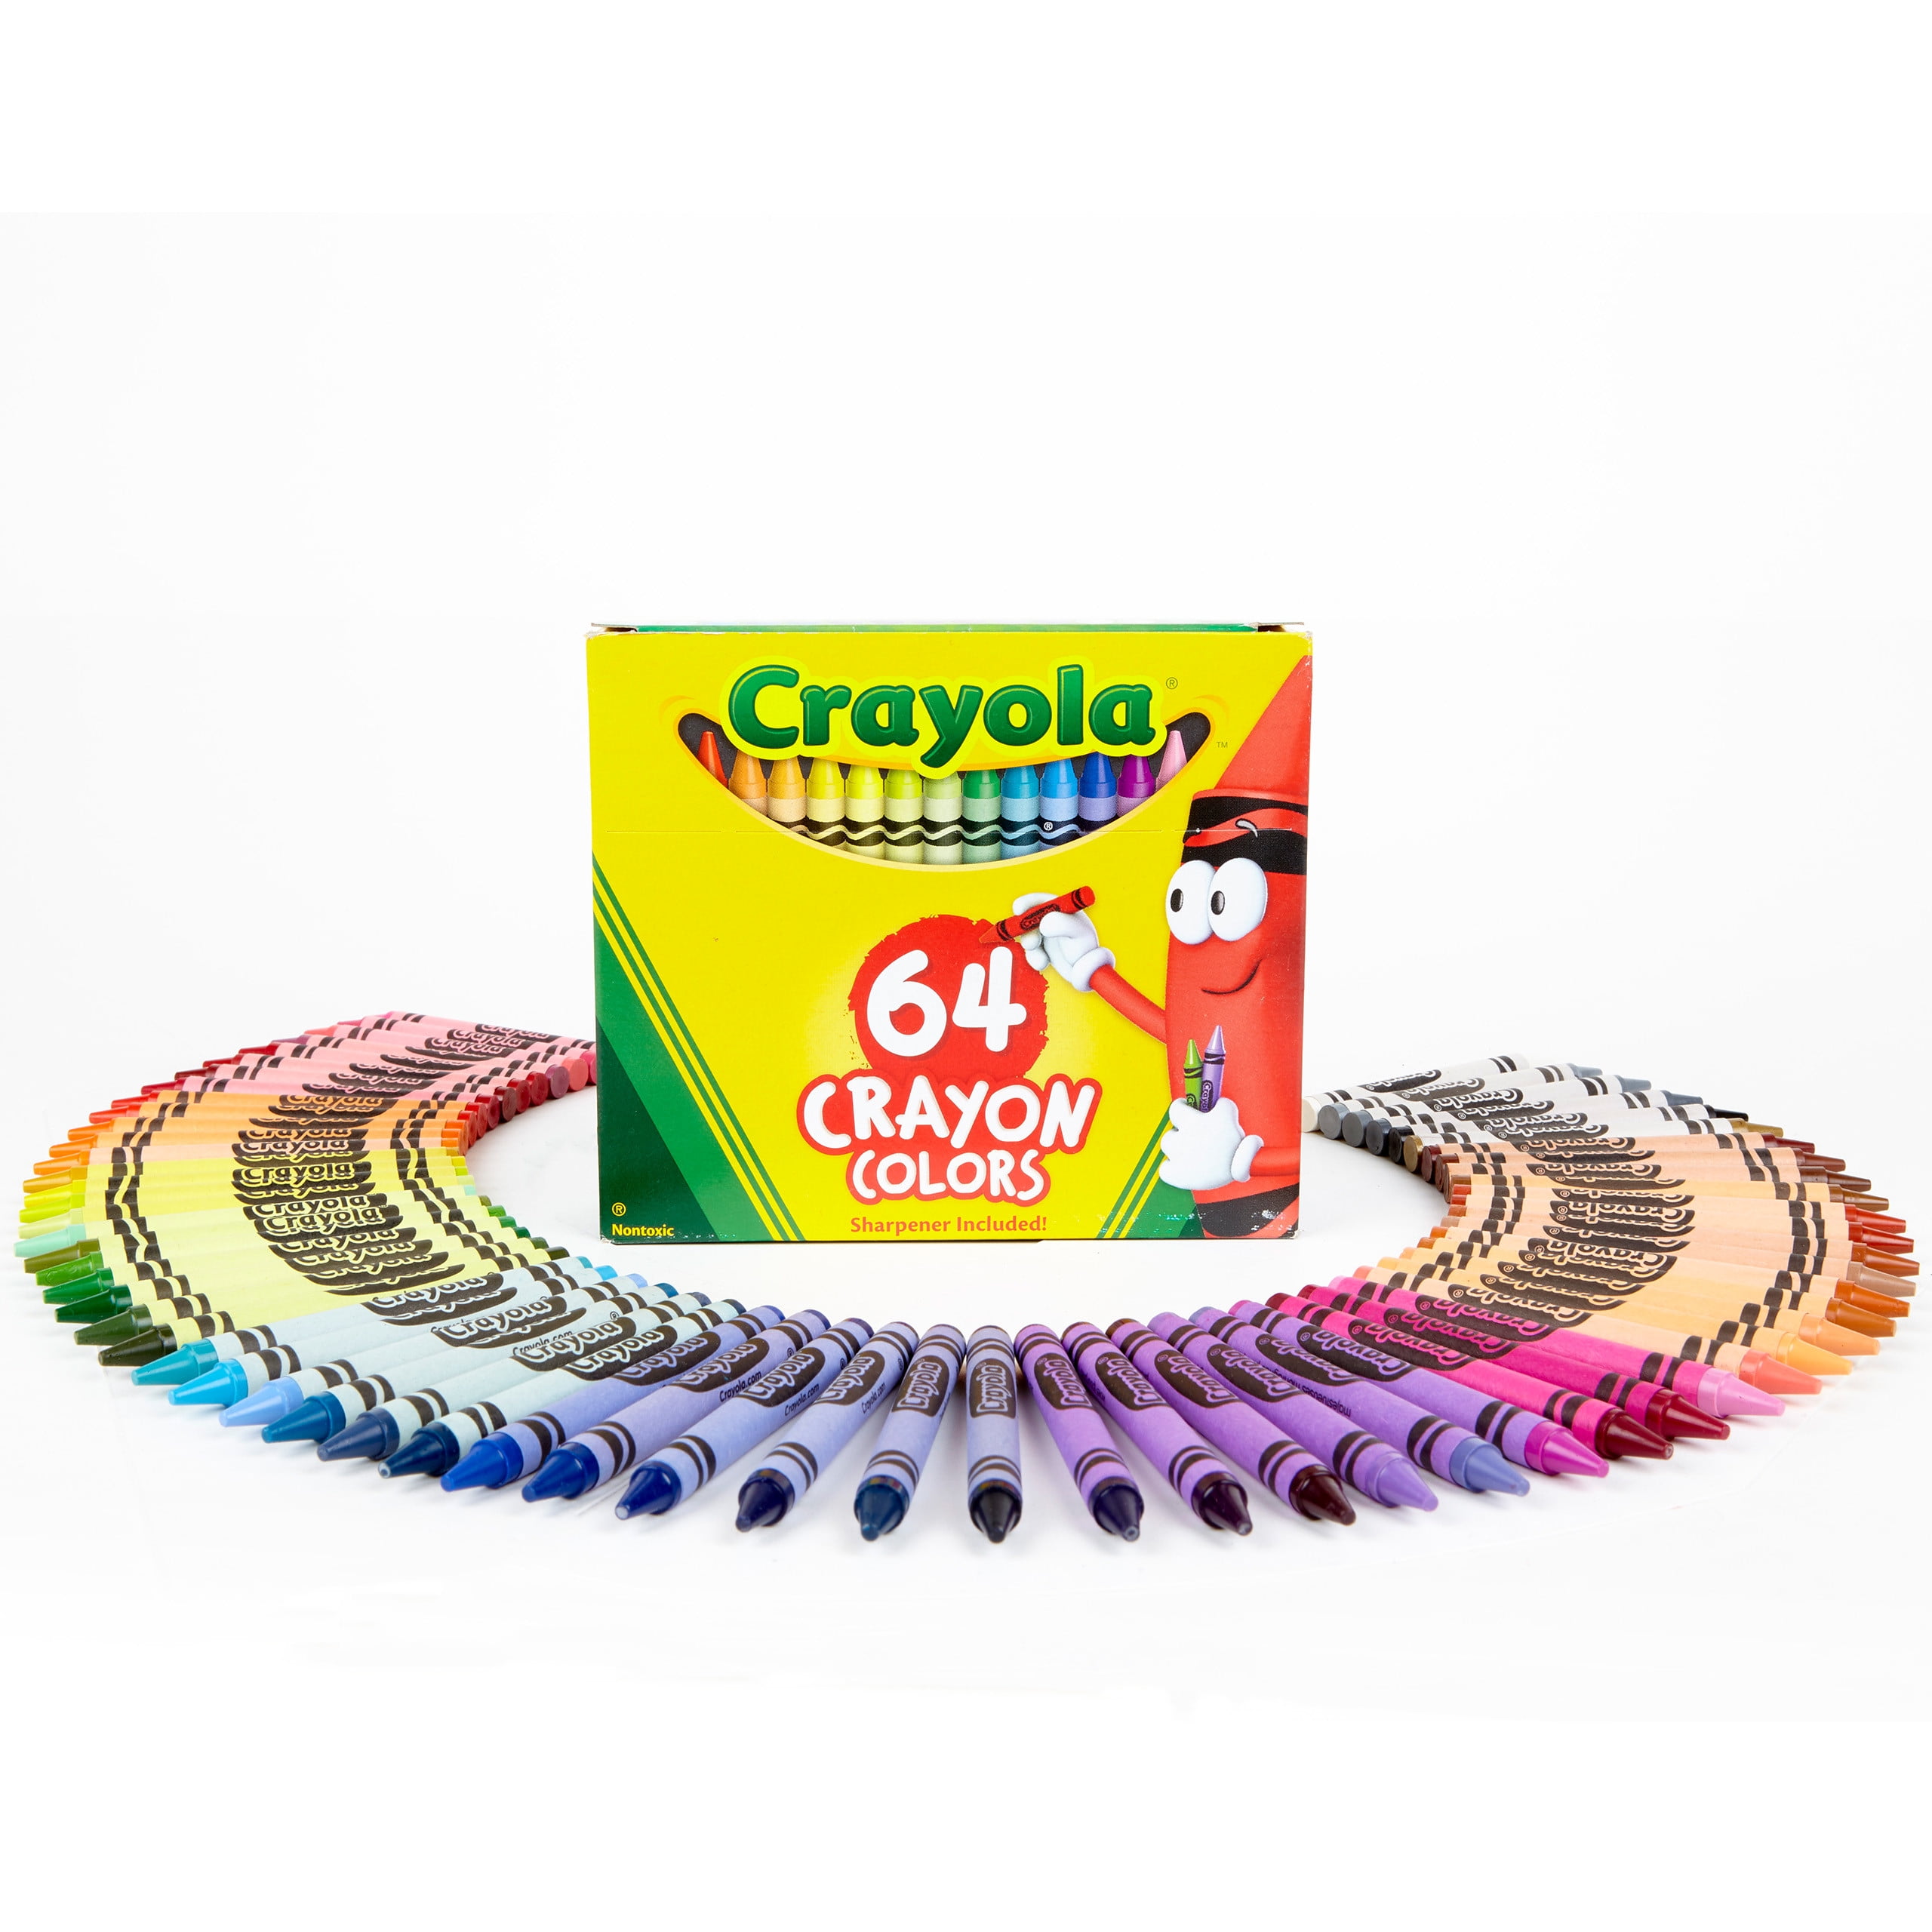 1989 Sealed Crayola Crayons 64 count with Fluorescent 8 pack